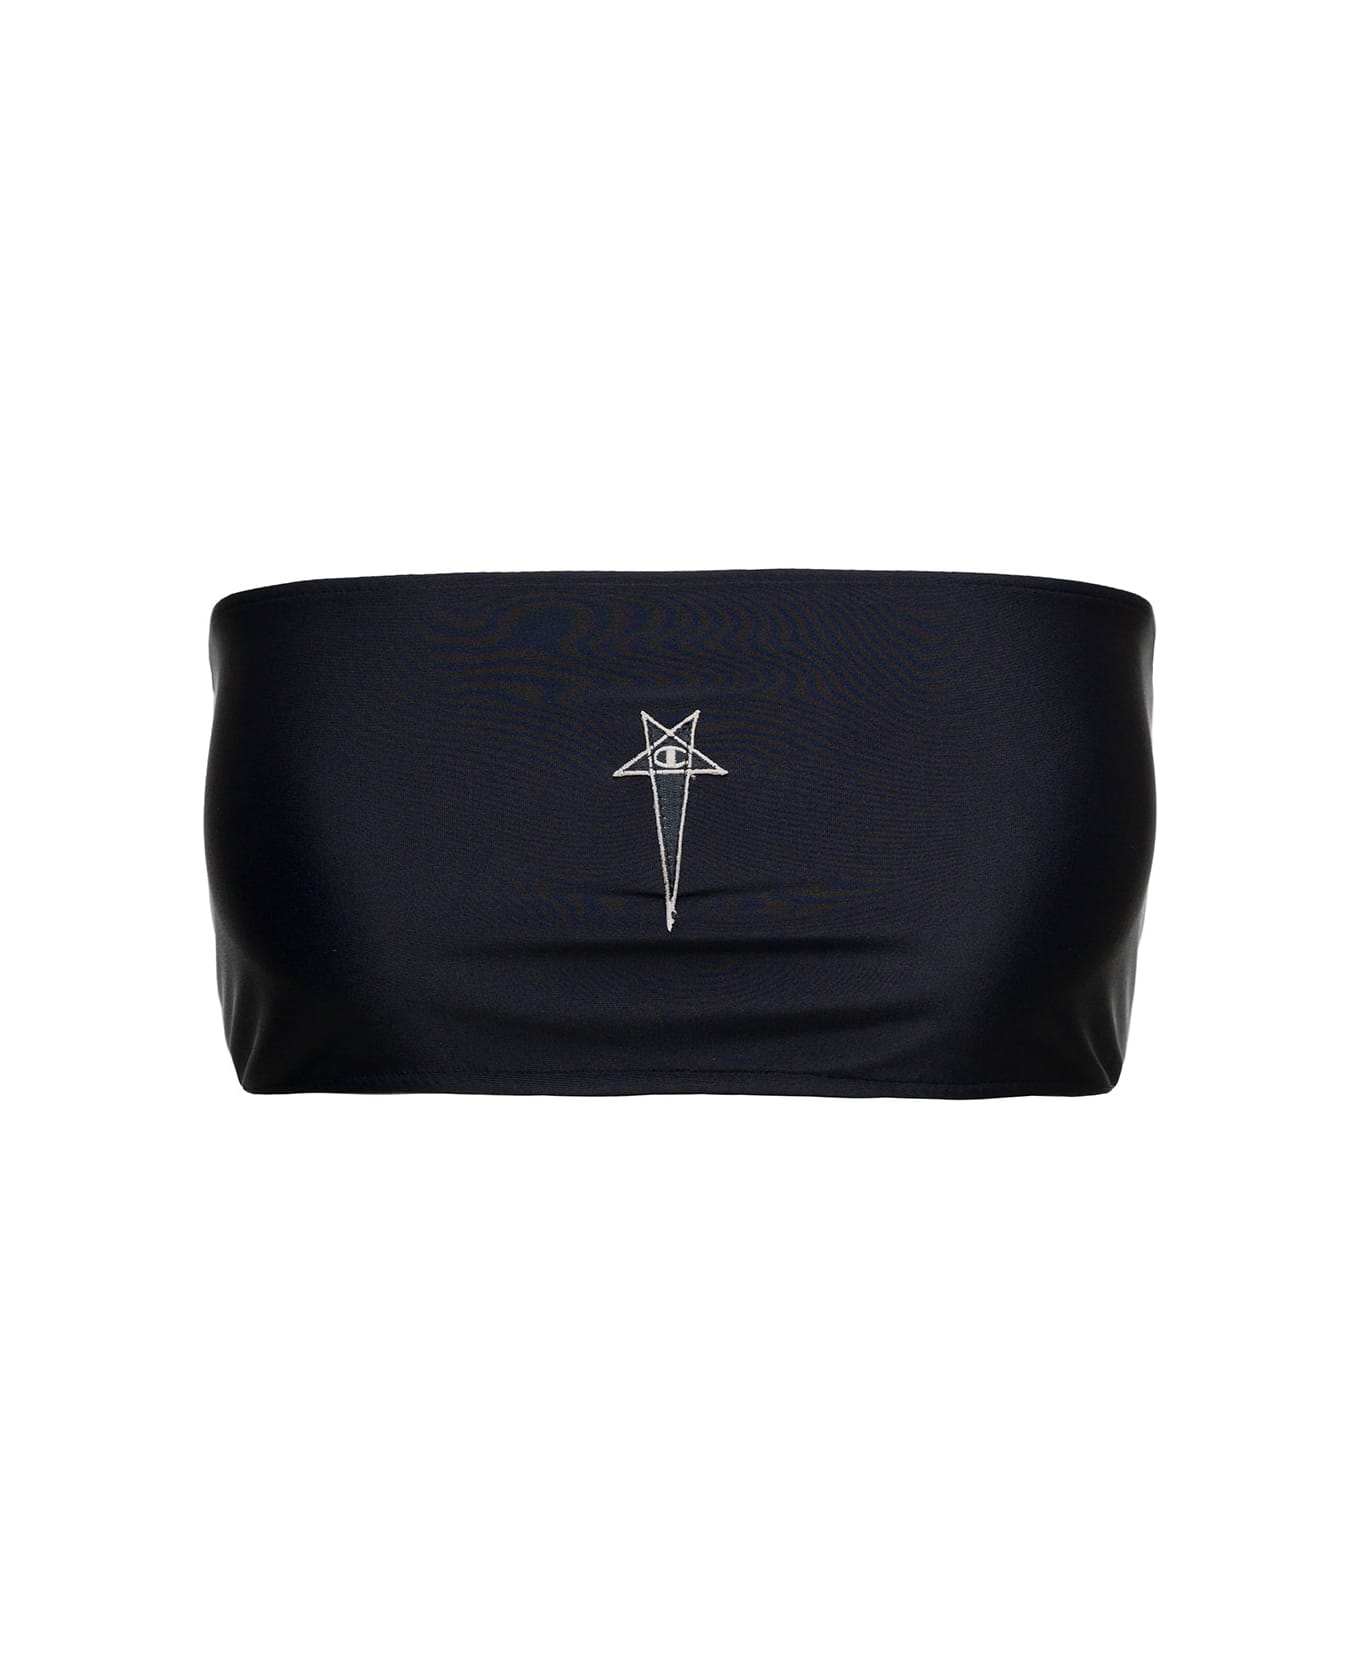 Rick Owens x Champion Black Bandeau Top With Pentagram Embroidery At The Front In Stretch Nylon Woman - Nero